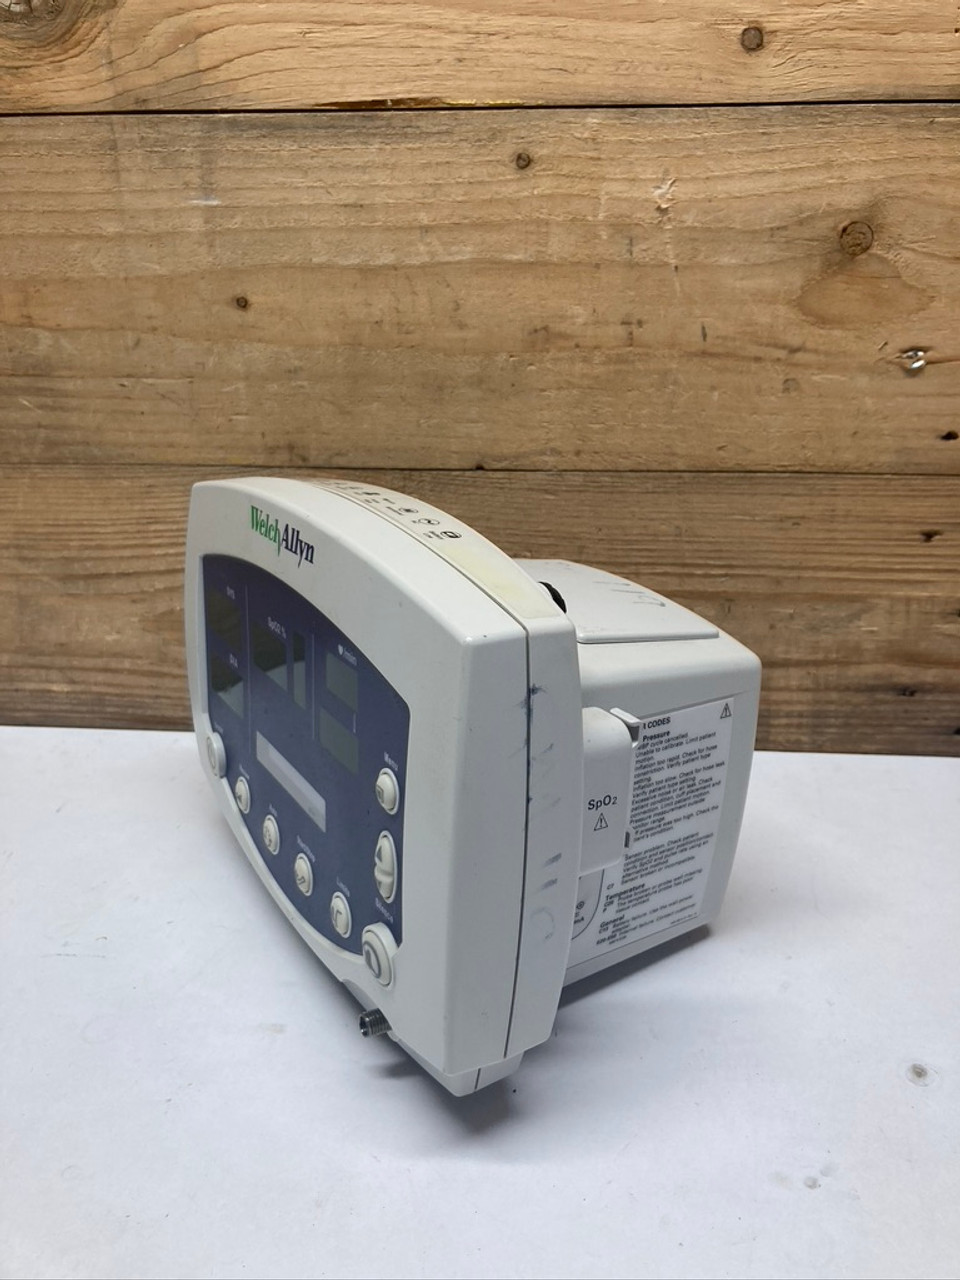 Patient Vital Signs Monitor 53NT0 007-0104-01 Welch Allyn